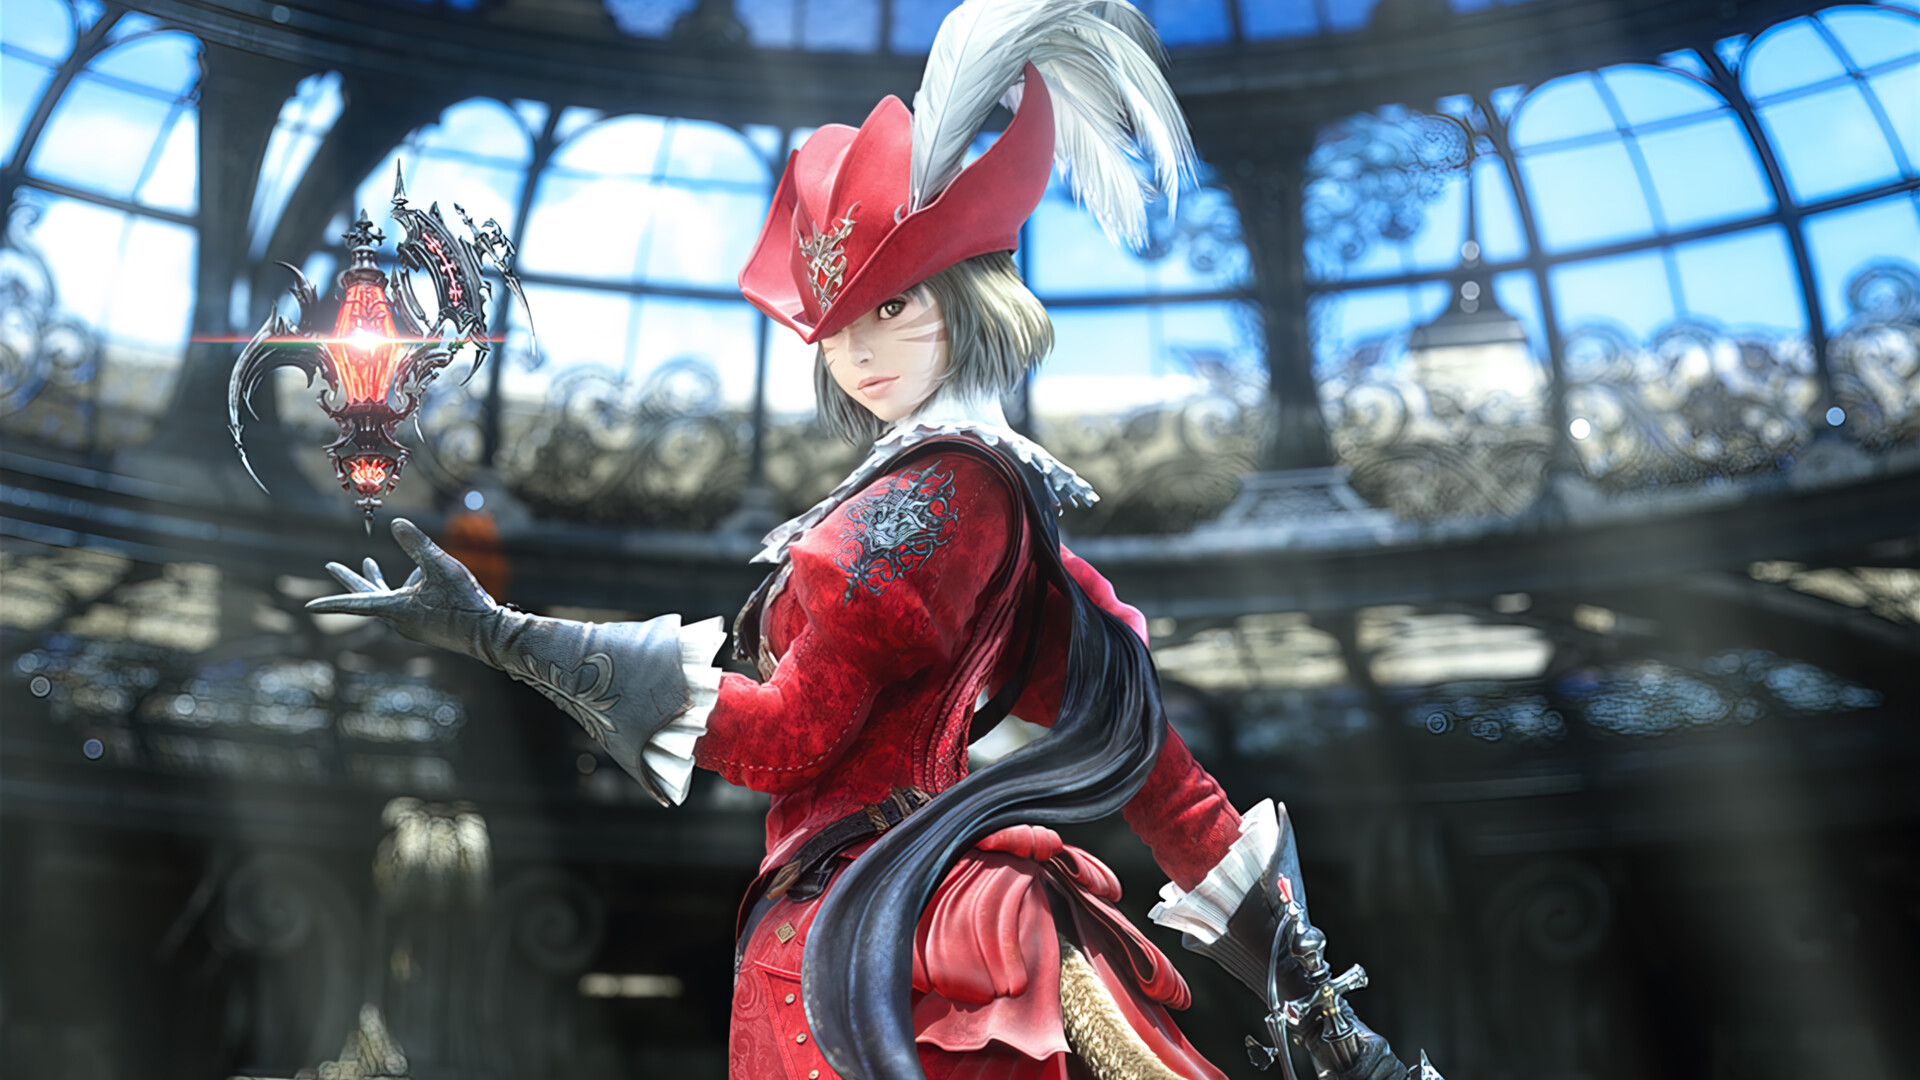 InverseGamer "With this simple guide, learn how to unlock the new Red Mage in FFXIV Stormblood https://t.co/hNGit0zwCf https://t.co/iTr96HlyFy" / Twitter